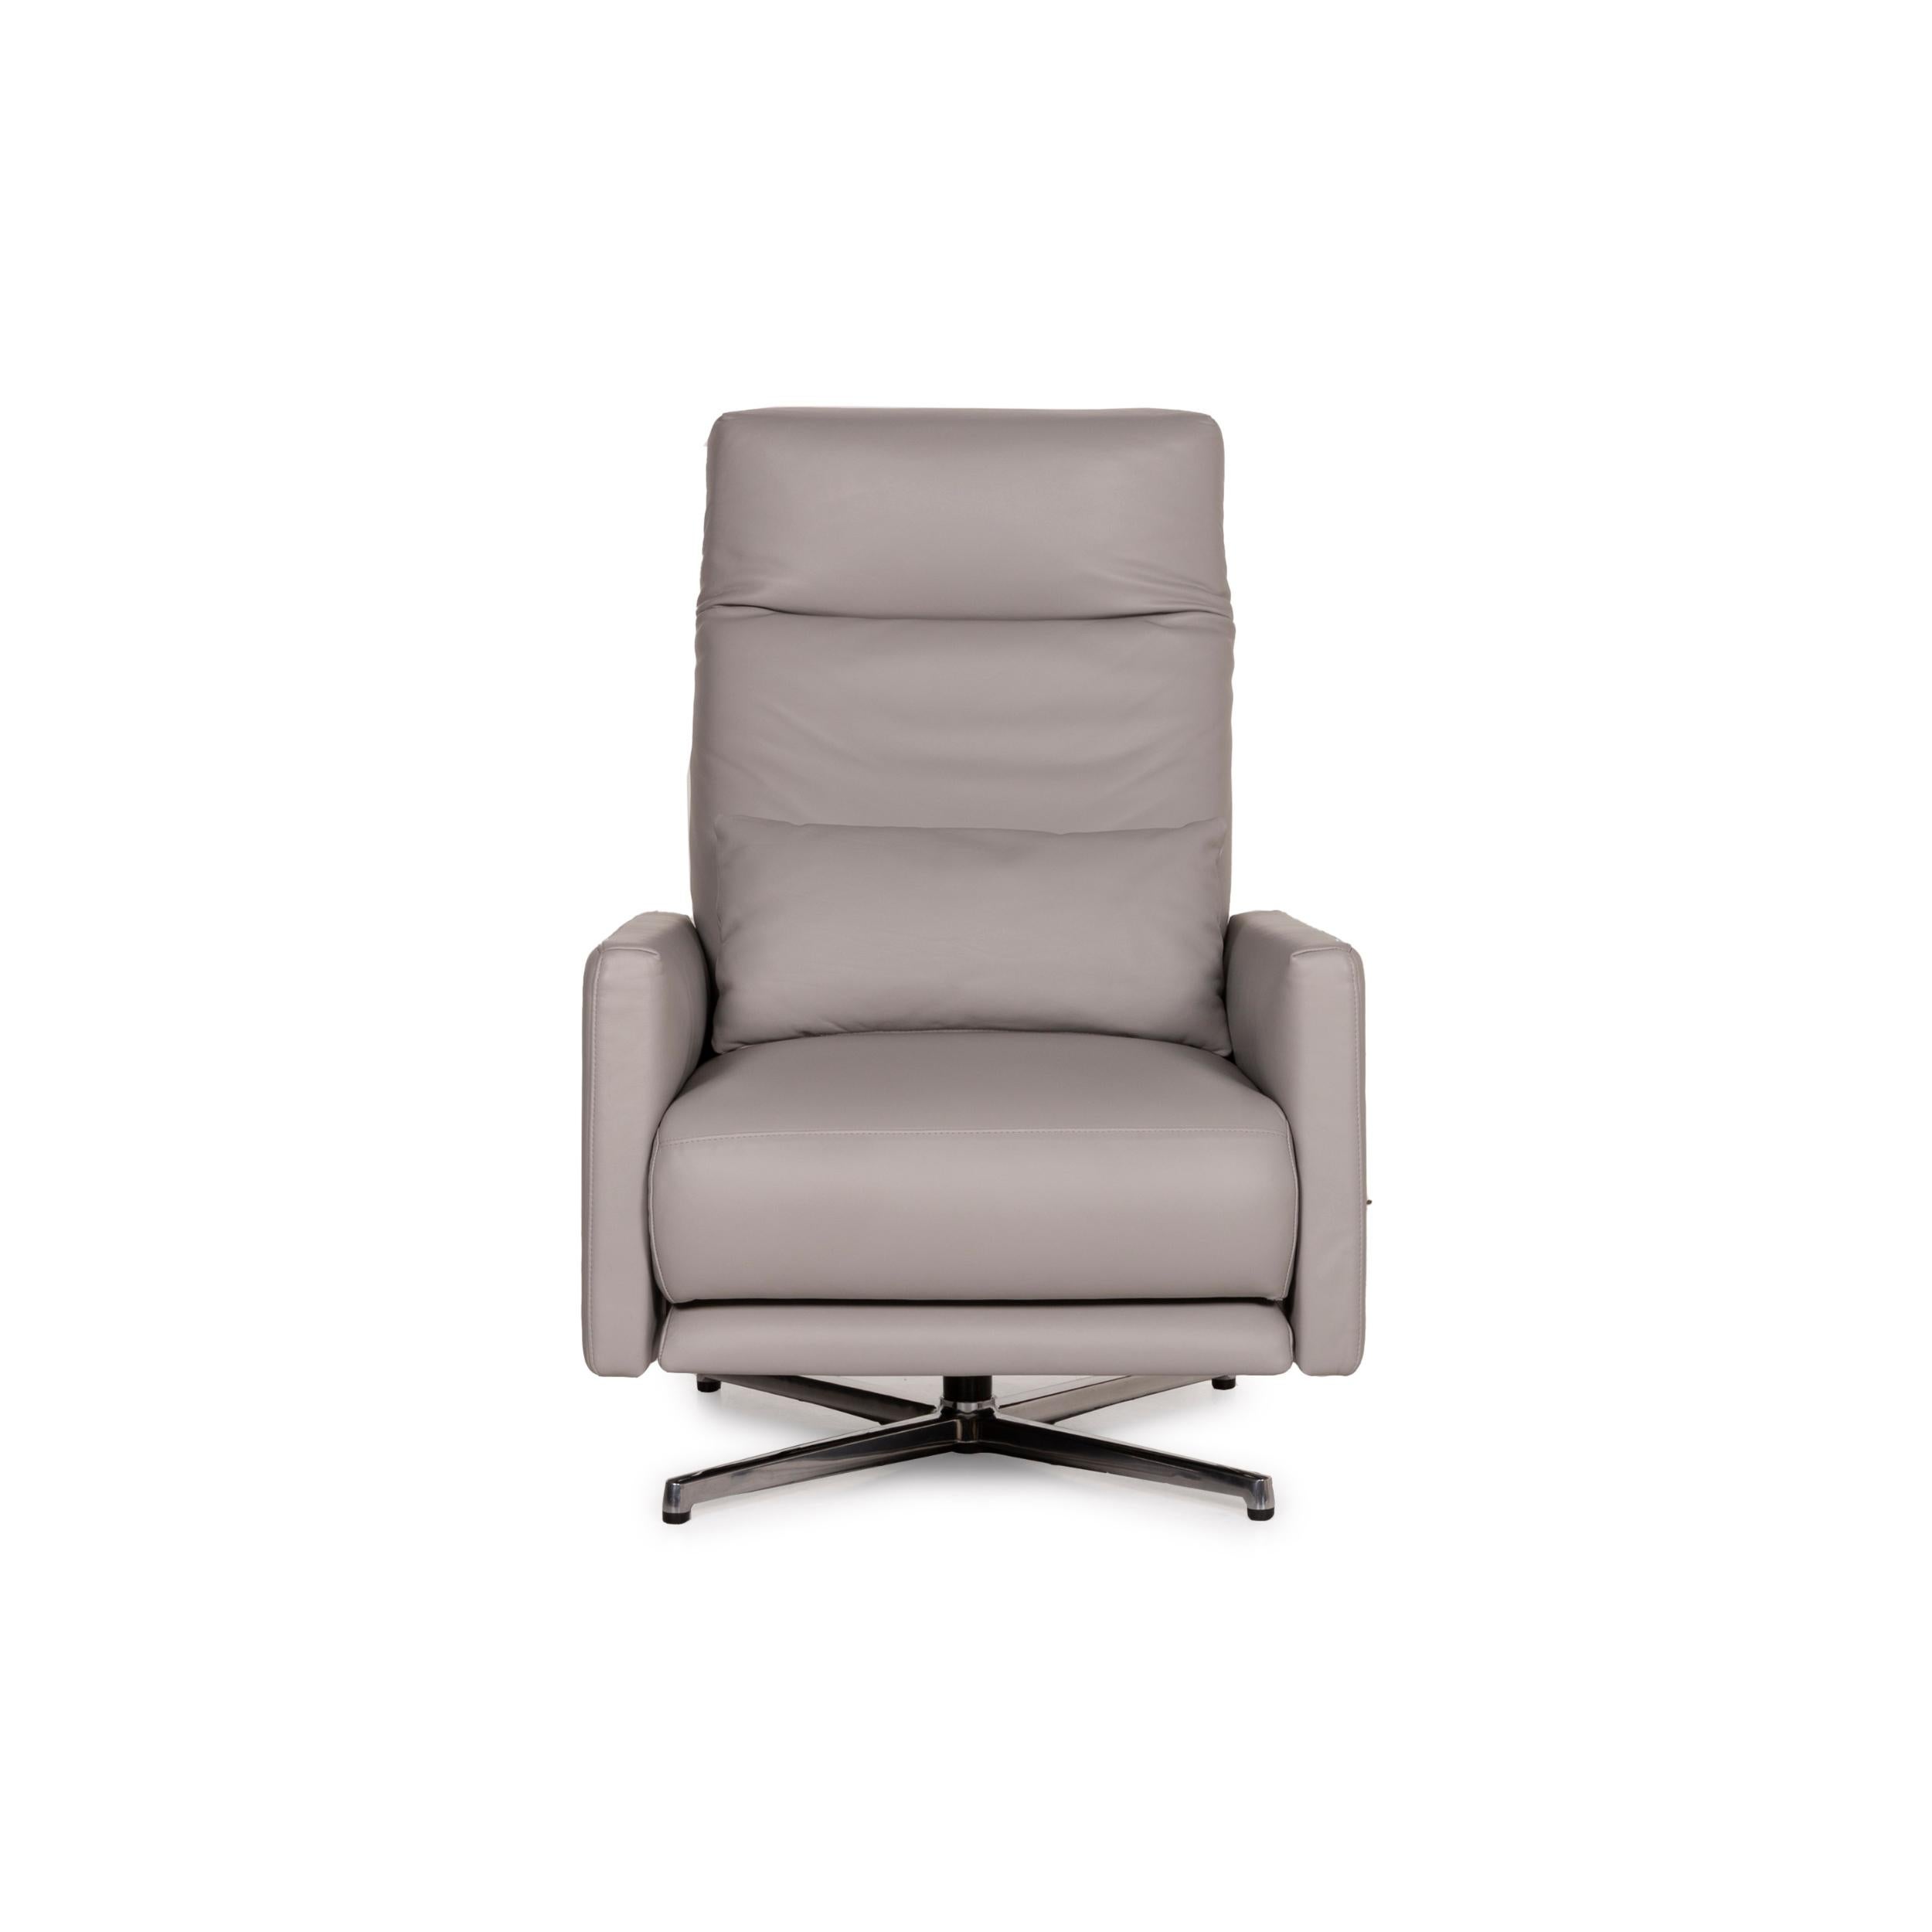 Contemporary Rolf Benz 574 Leather Armchair Gray Relax Function